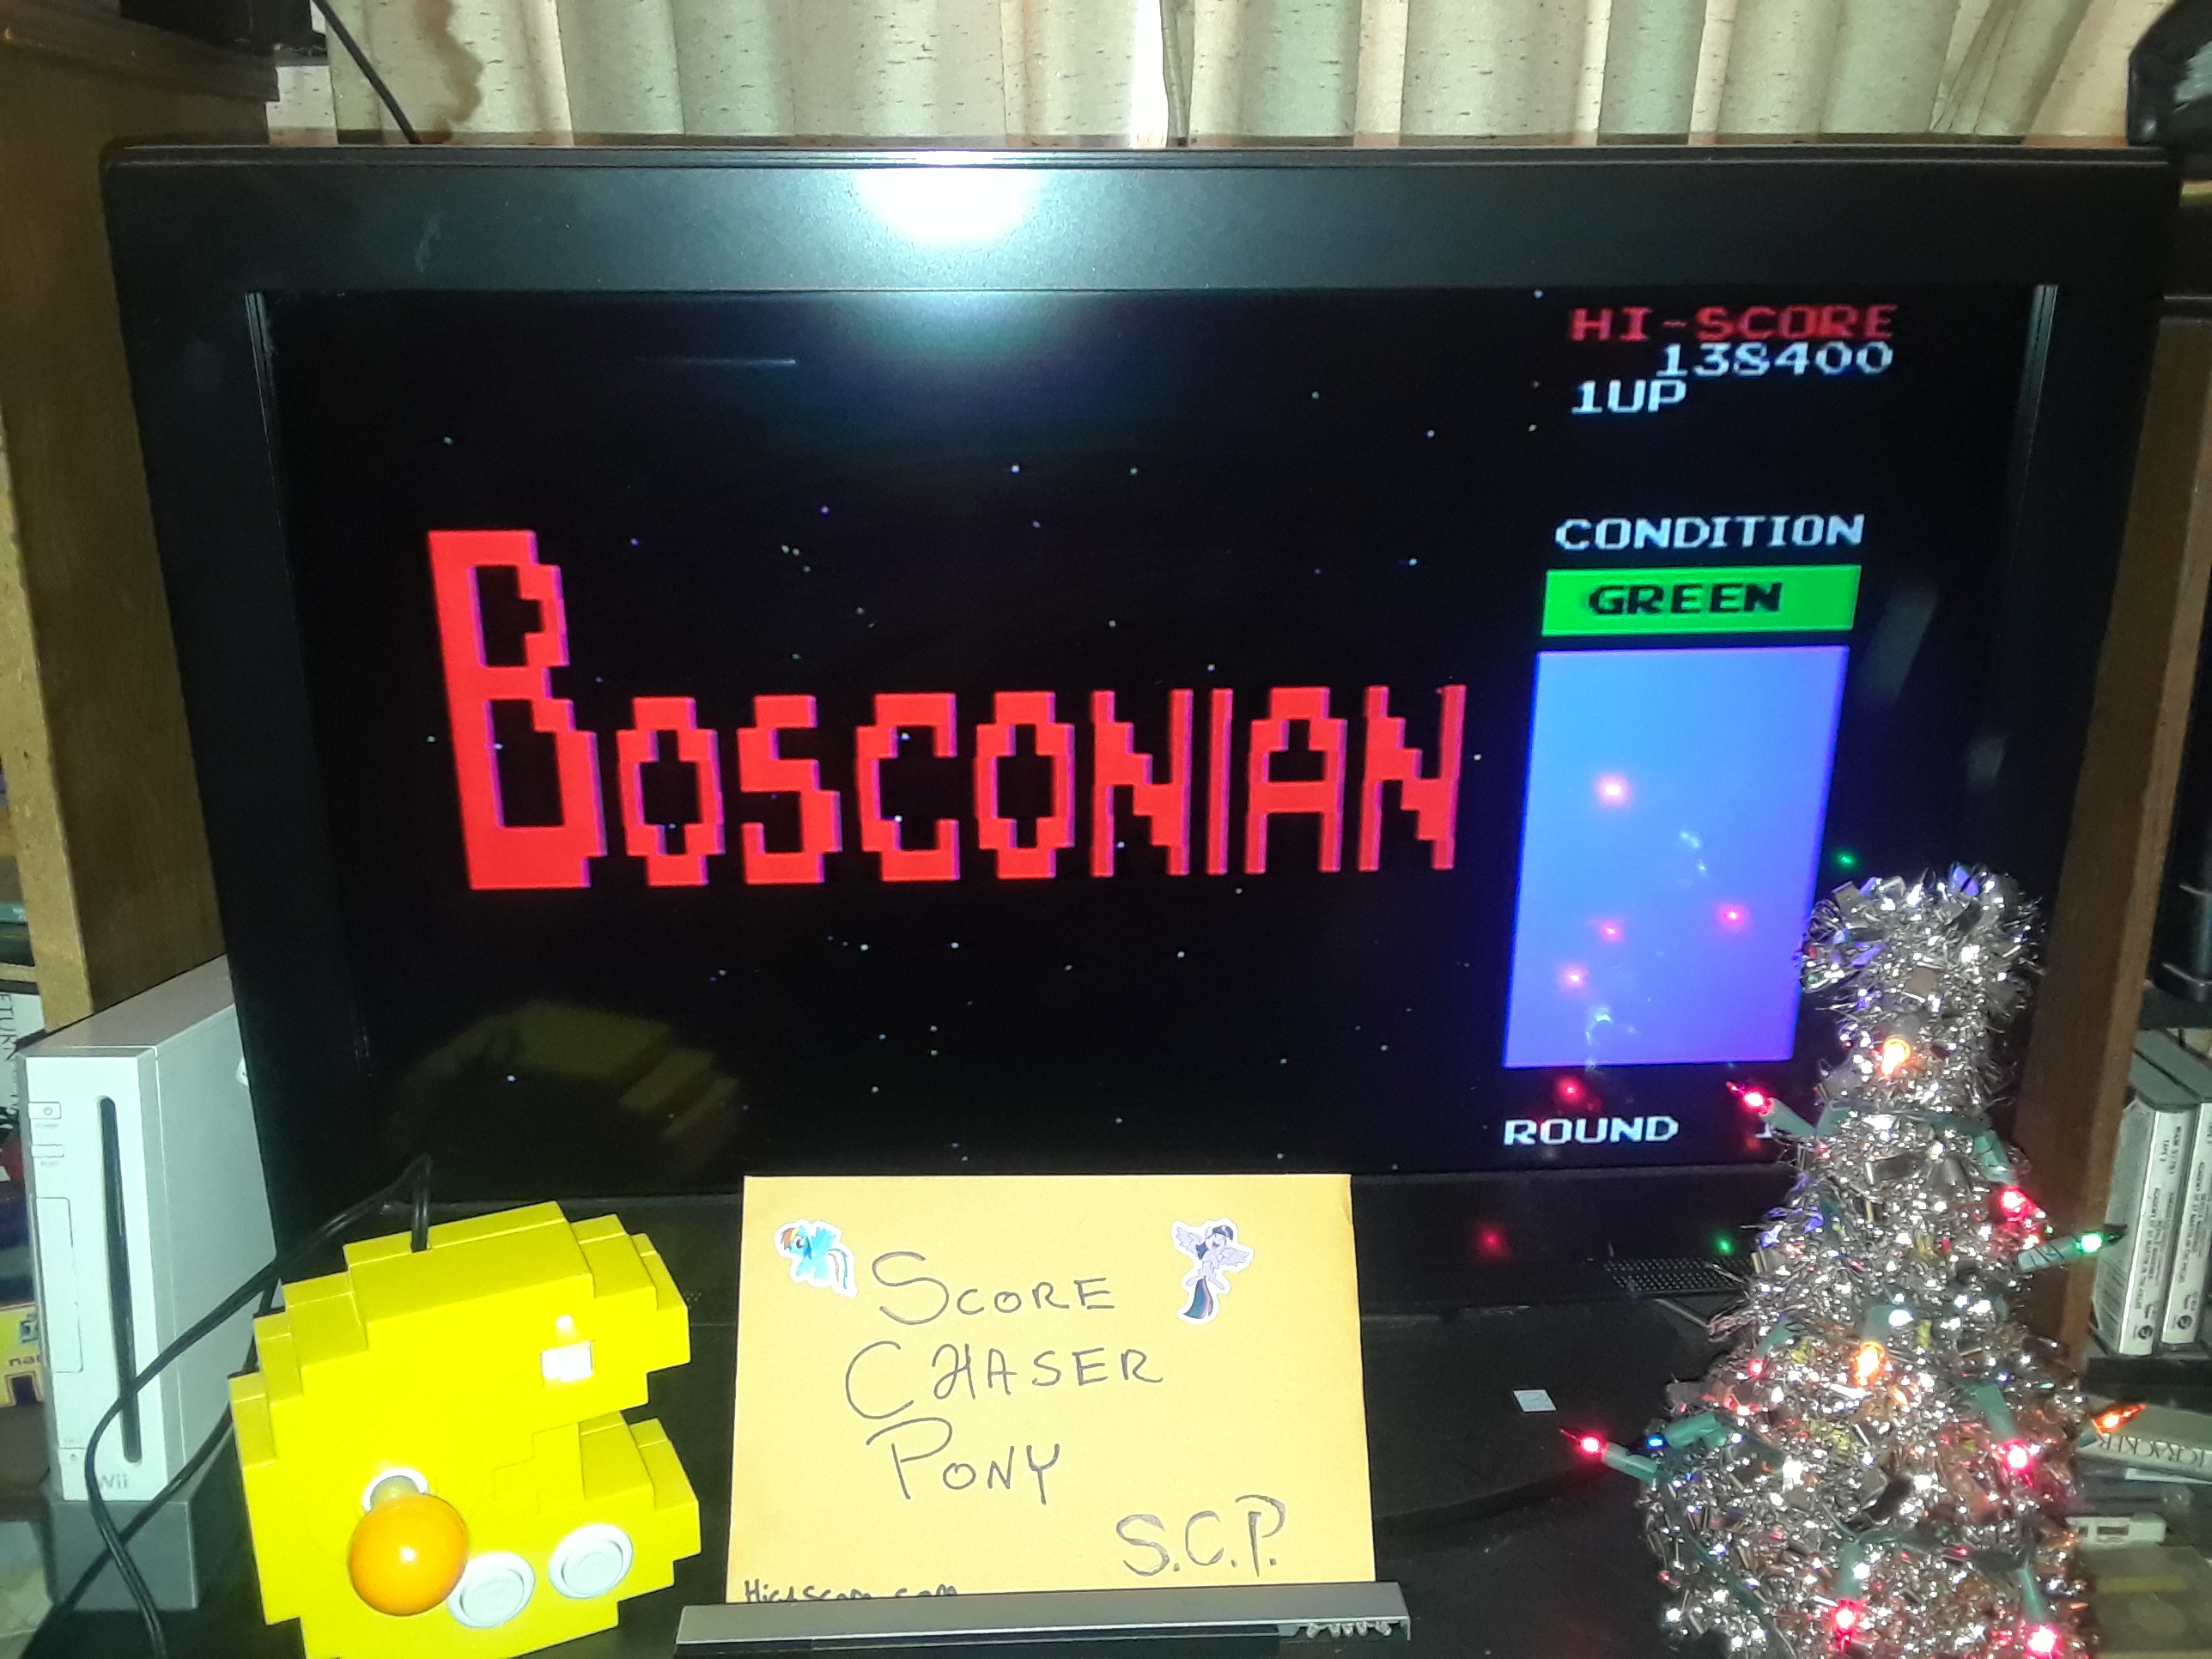 Scorechaserpony: Bandai Pac-Man Connect & Play: Bosconian (Dedicated Console) 138,400 points on 2018-12-29 11:05:09